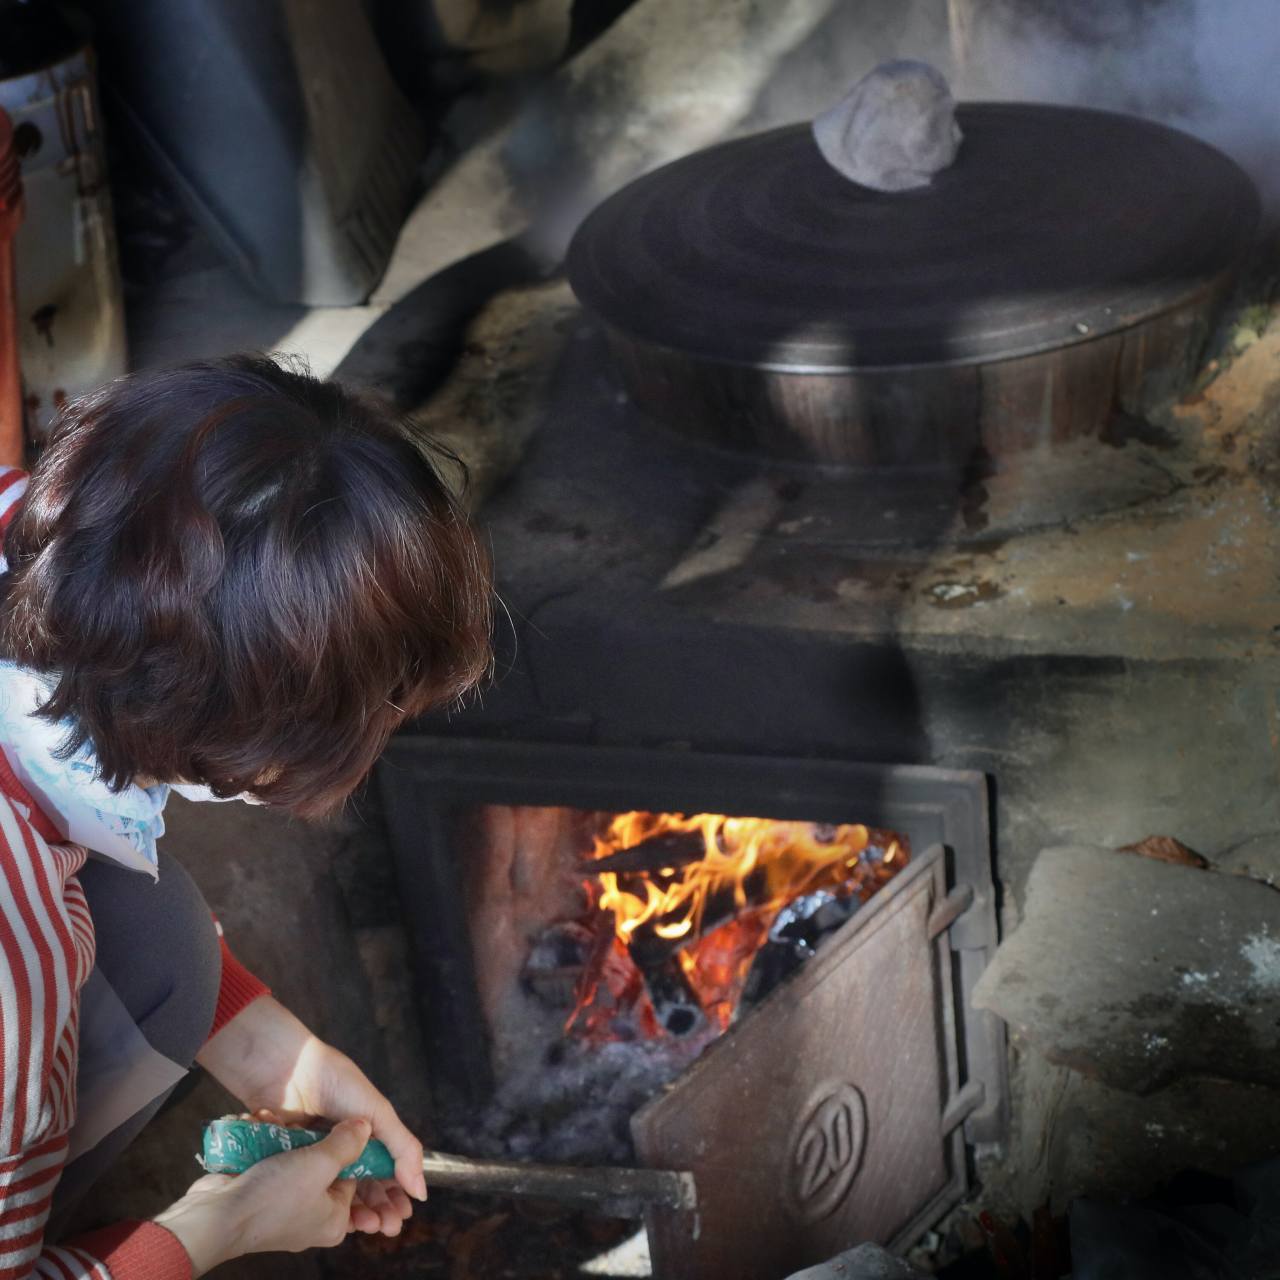 Nam Gyeong-hee uses firewood to cook food in a cast iron pot at a traditional house in Yeongyang, North Gyeongsang Province. The heat and the thermal energy from the fuel burned in the fire pit heats the ondol underfloor in the house. Photo © 2020 Hyungwon Kang